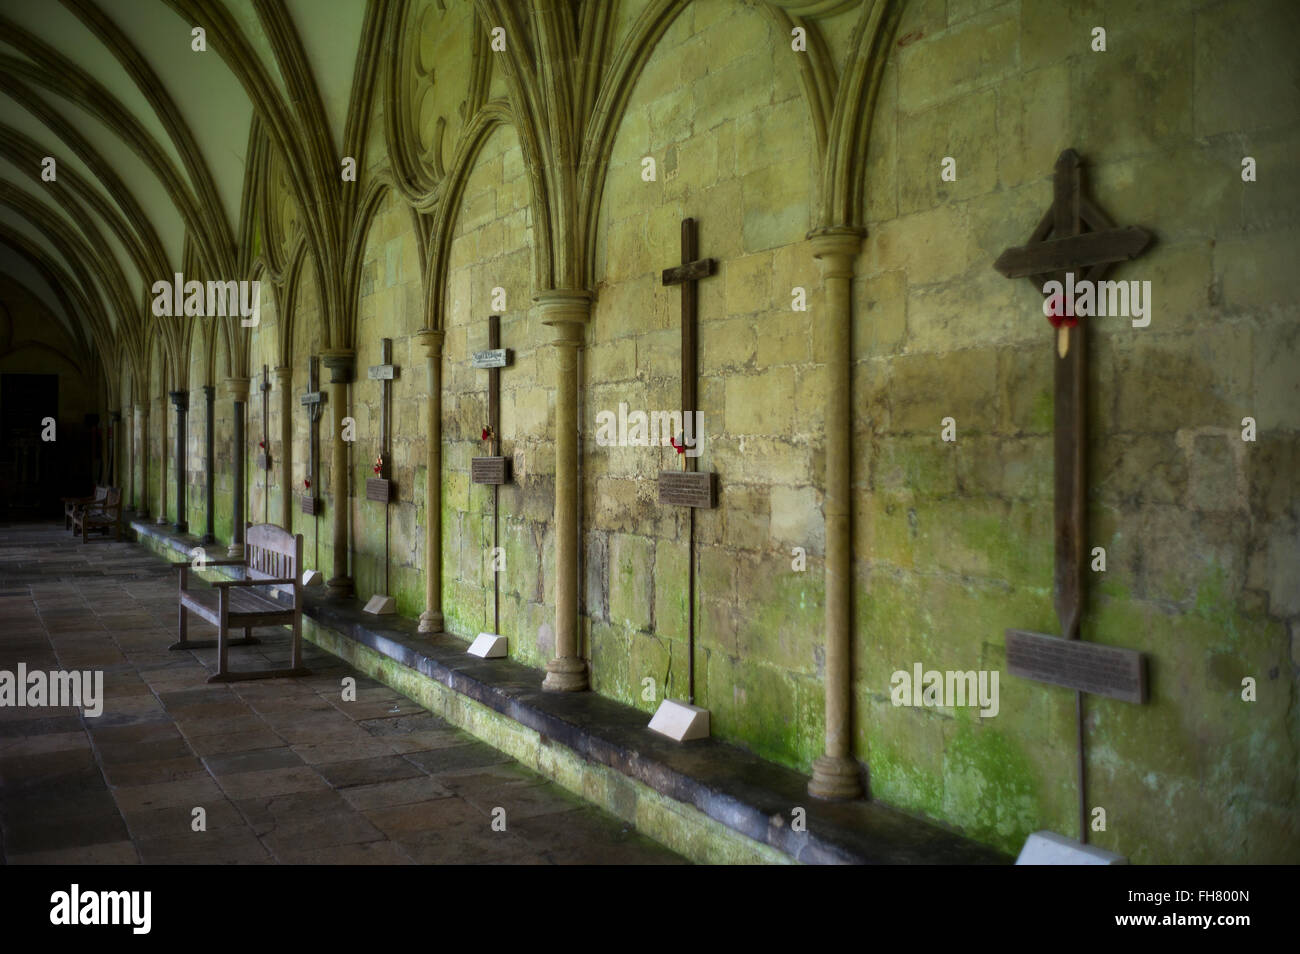 Salisbury Cathedral, Wiltshire,England,UK. Feb 2016 WWI crooses in the cloisters used as grave markers before headstones were used. Salisbury Cathedral, formally known as the Cathedral Church of the Blessed Virgin Mary, is an Anglican cathedral in Salisbury, England, and one of the leading examples of Early English architecture.[1] The main body of the cathedral was completed in only 38 years, from 1220 to 1258.  The cathedral has the tallest church spire in the United Kingdom (123m/404 ft). Visitors can take the 'Tower Tour' where the interior of the hollow spire, with its ancient wood scaffo Stock Photo